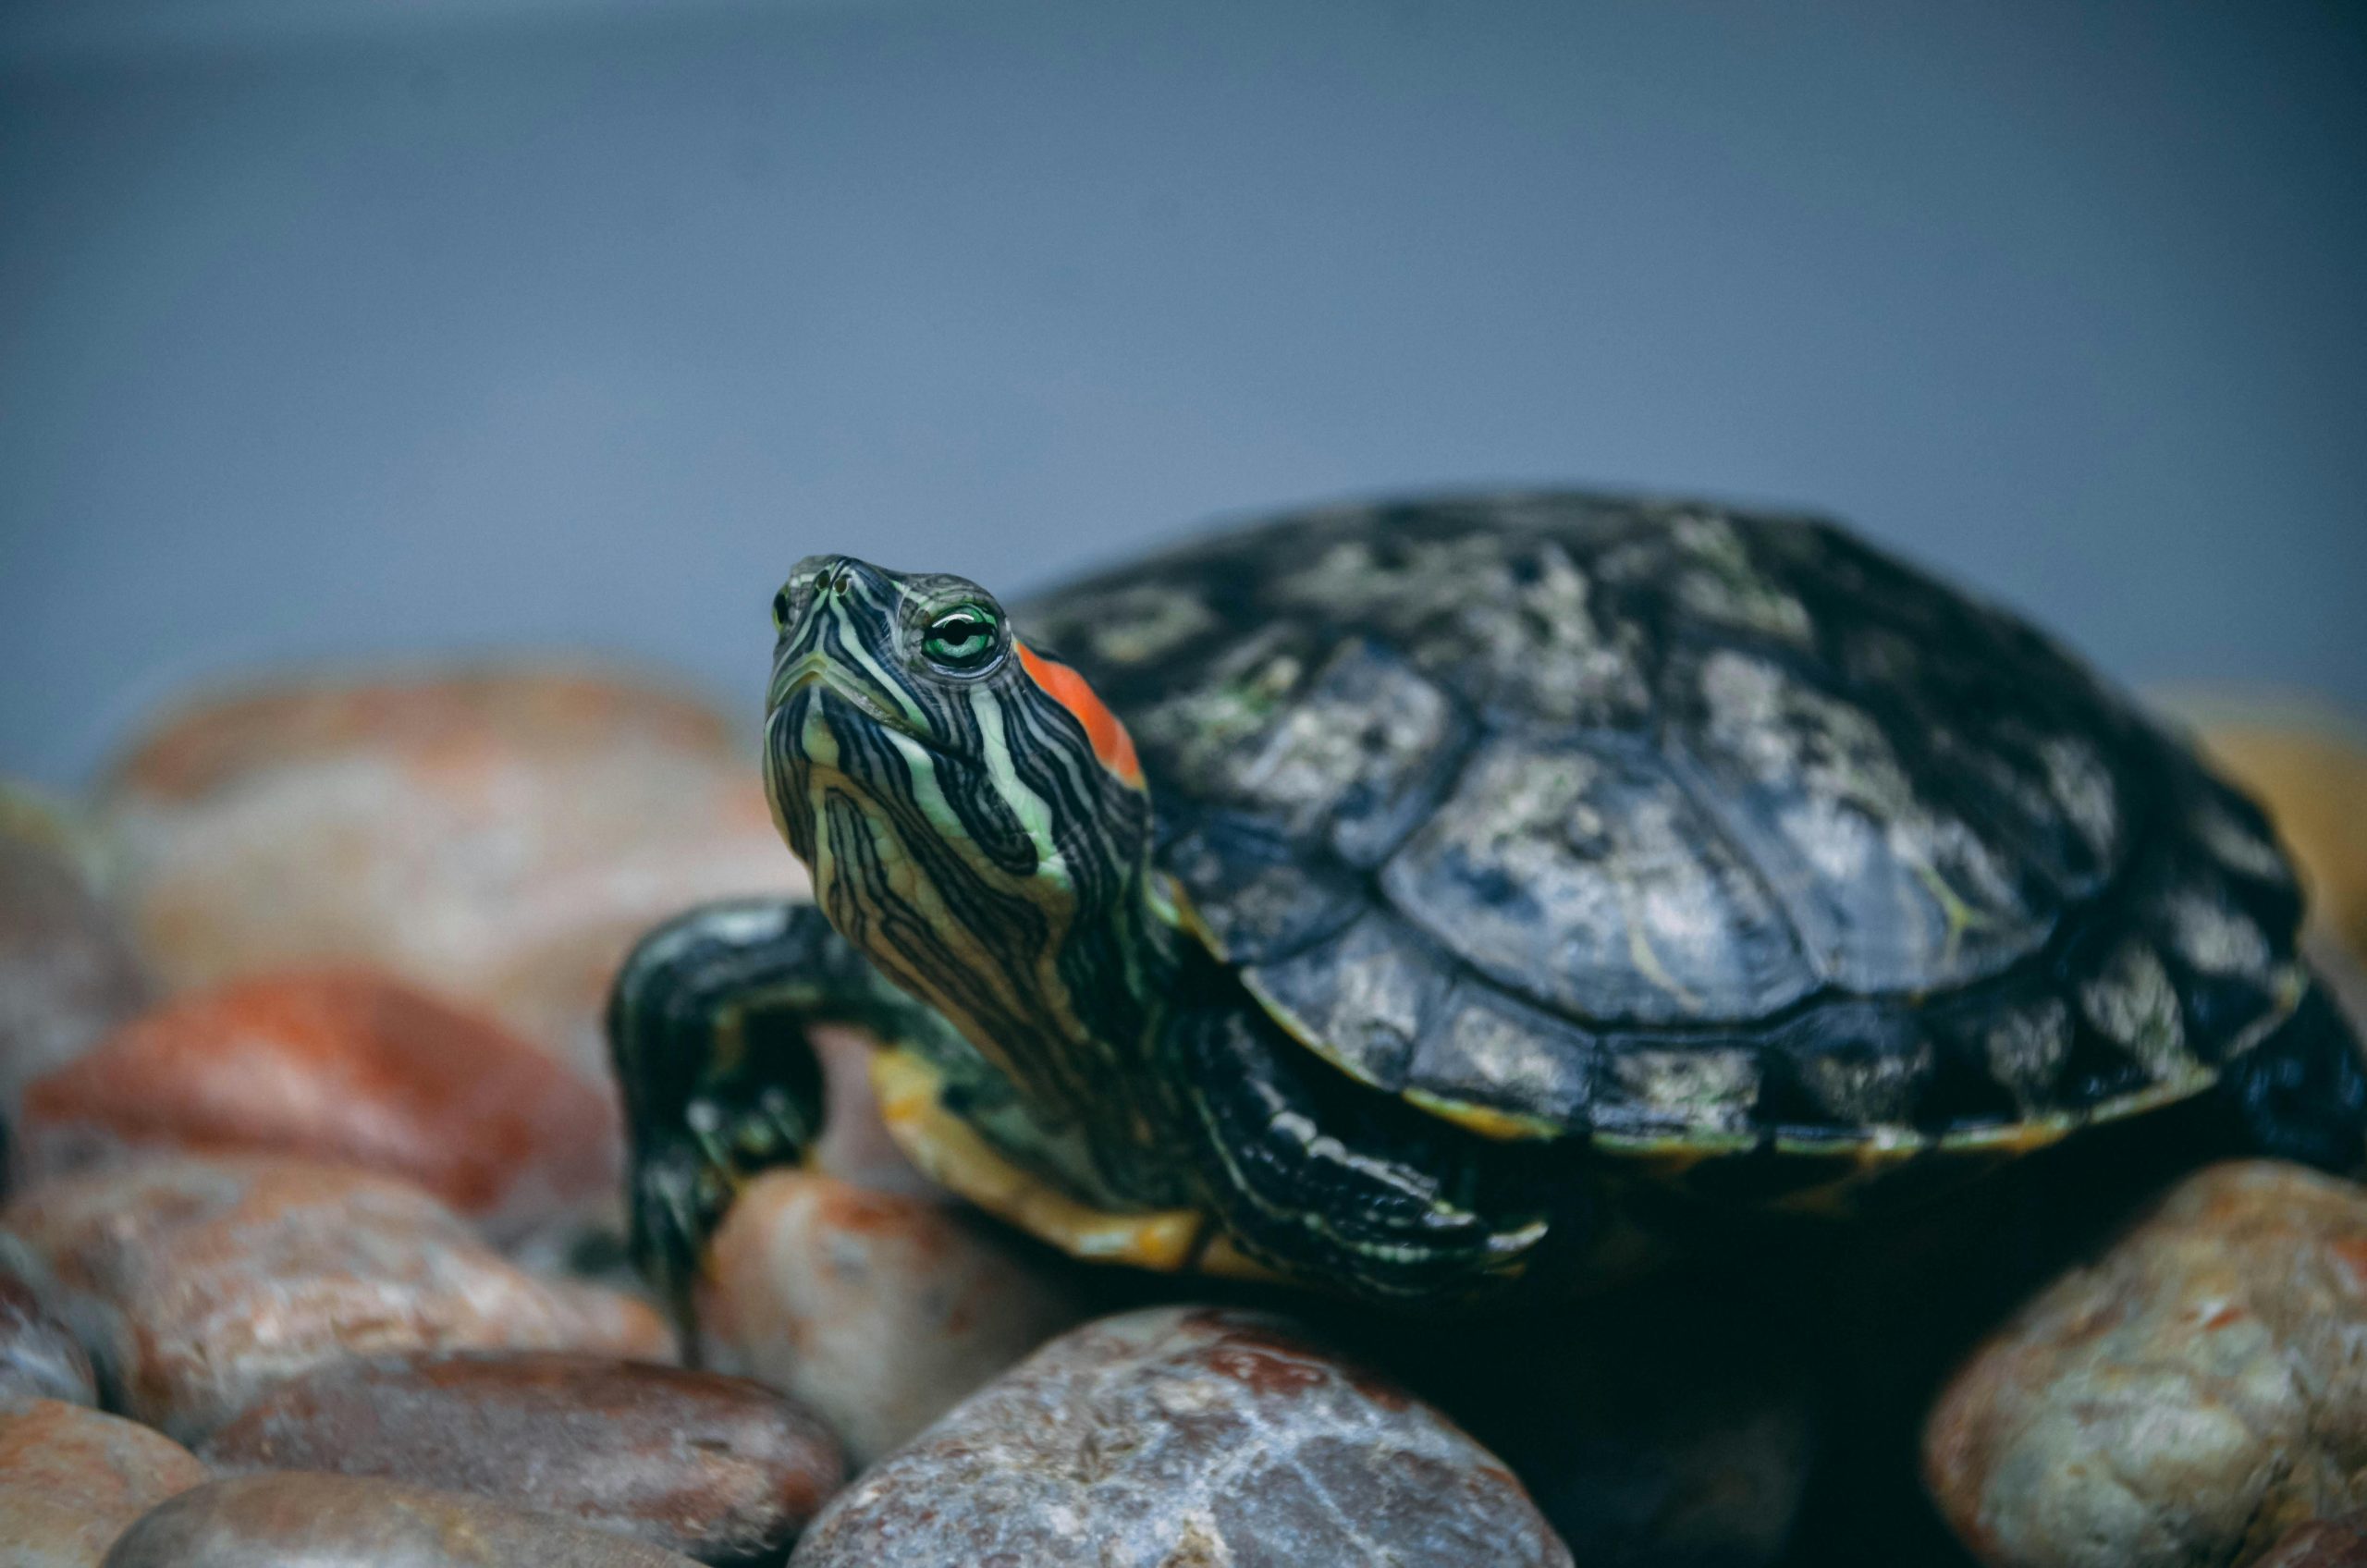 Why Do Red Eared Sliders Shake Their Hands?